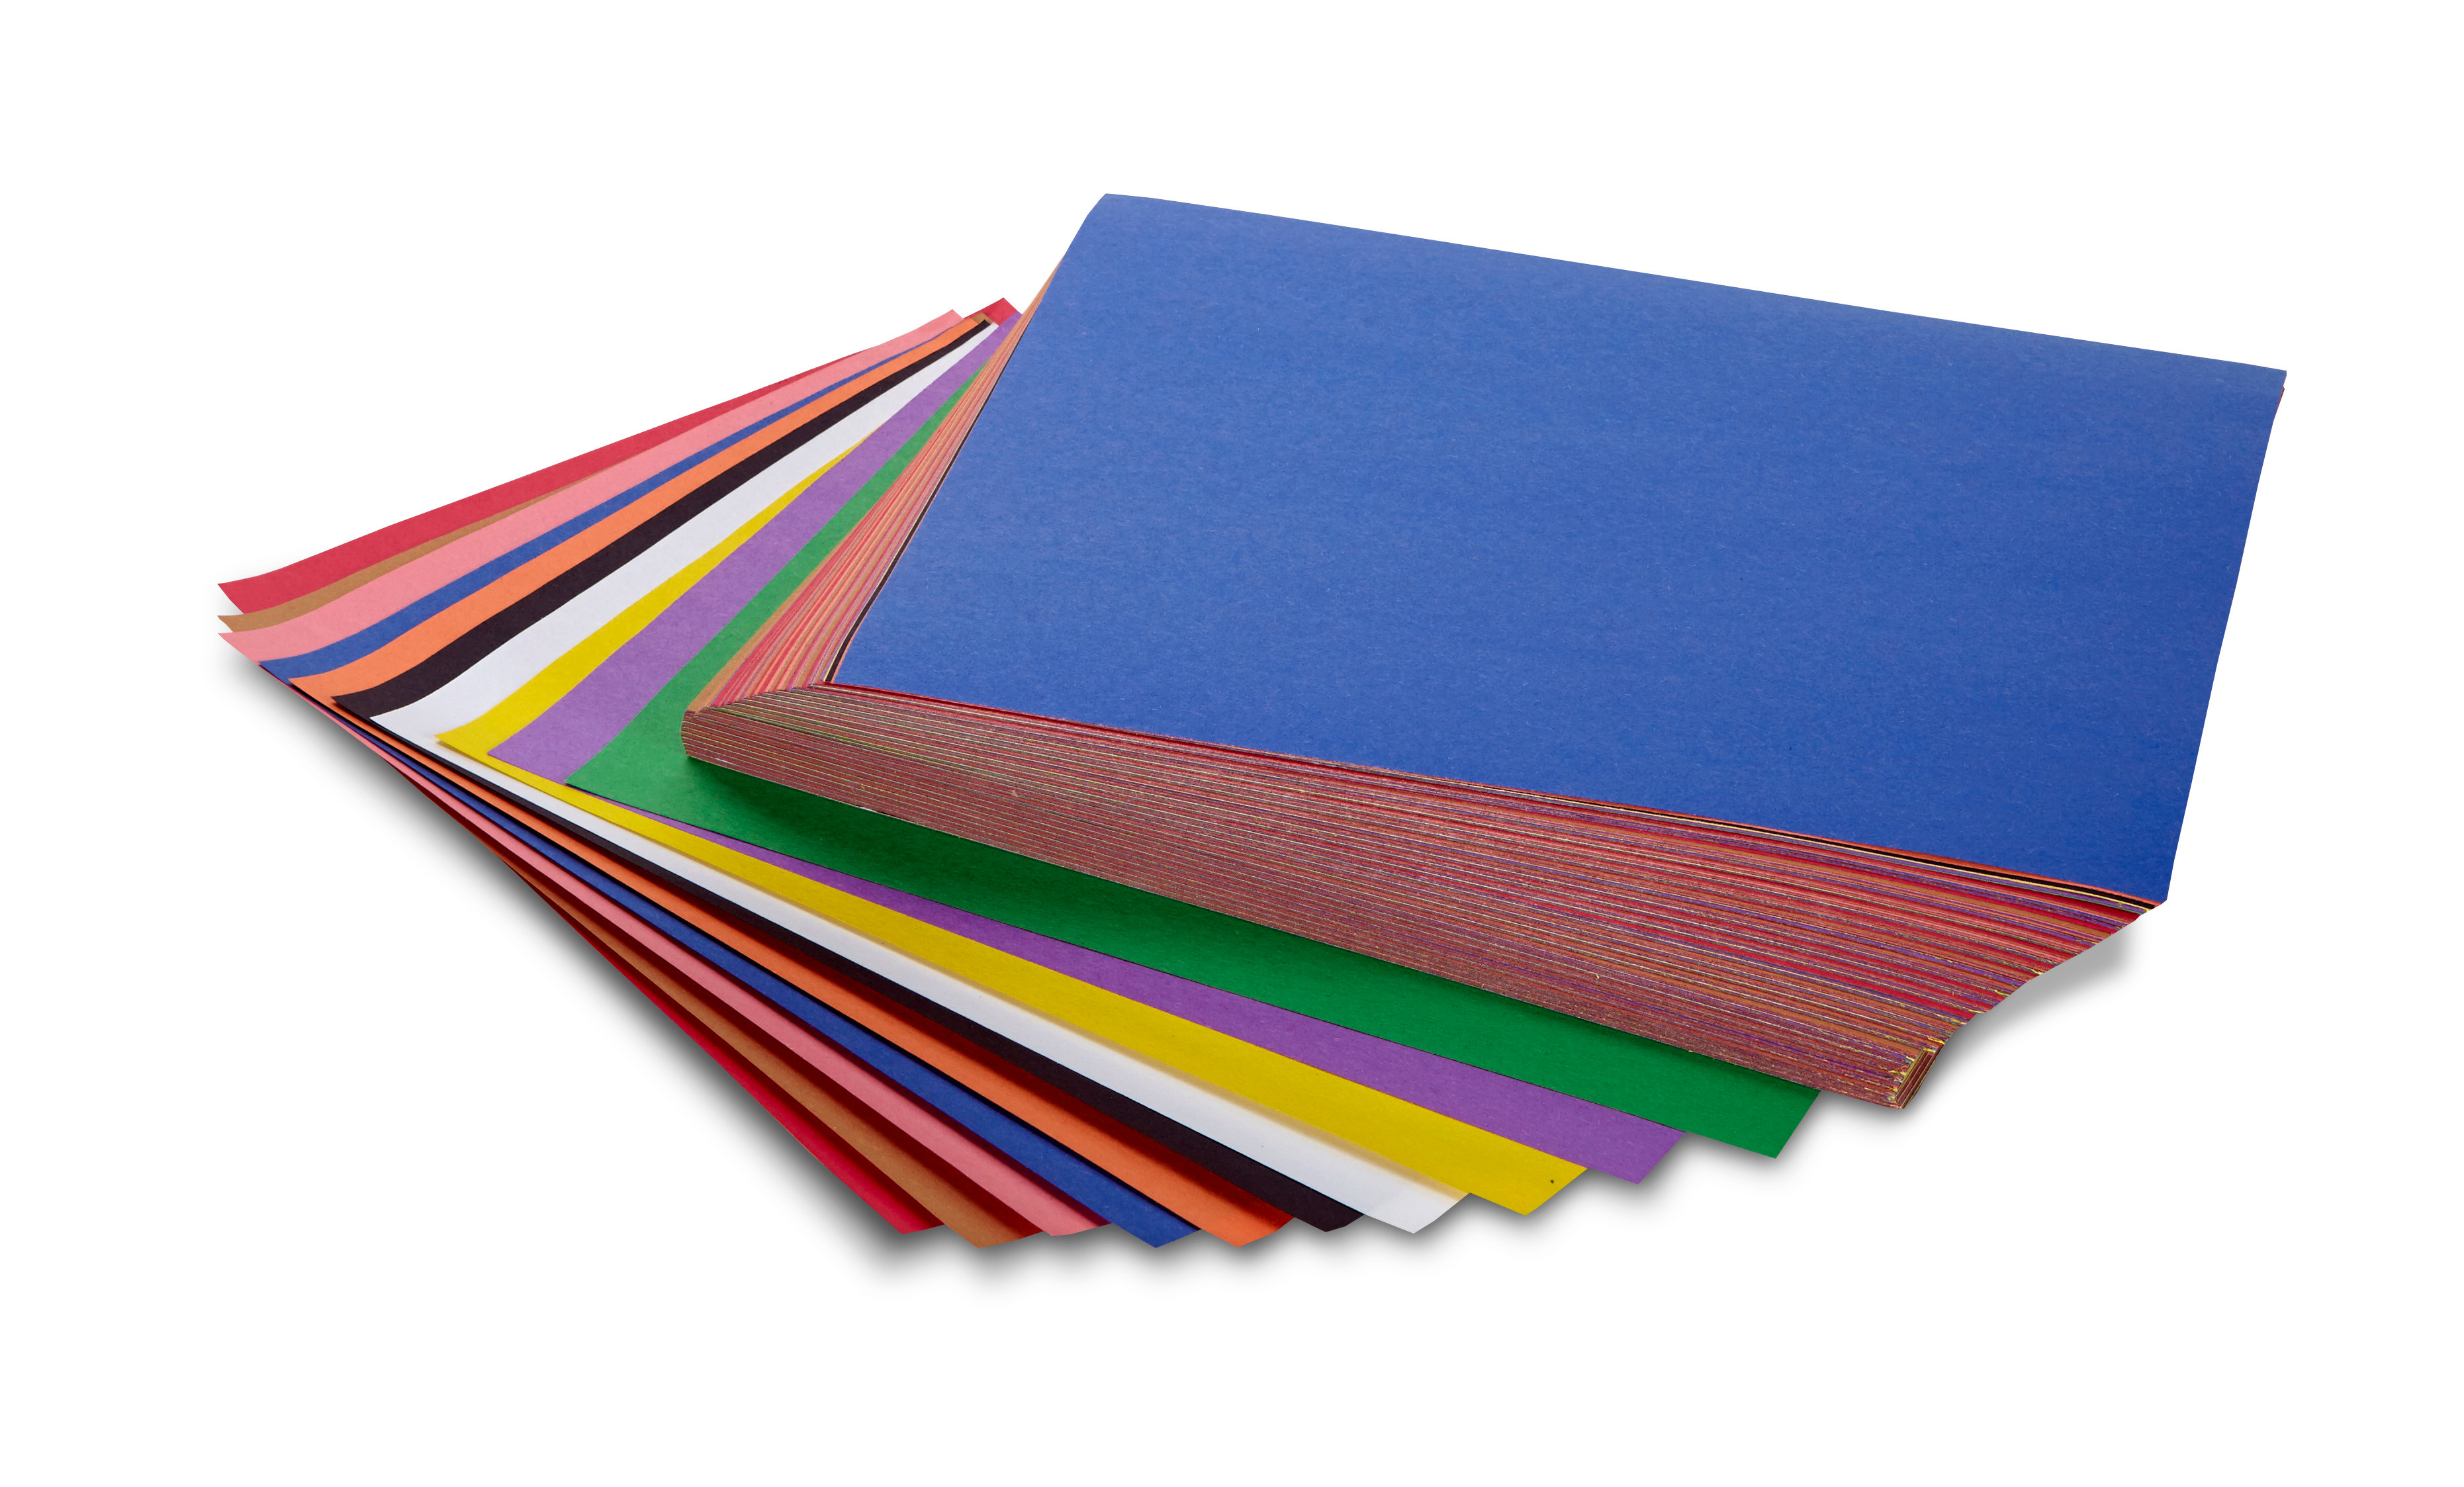 Crayola Construction Colored Paper in 10 Colors, School Supplies for Kindergarten, 120 Pcs, Child - image 5 of 11